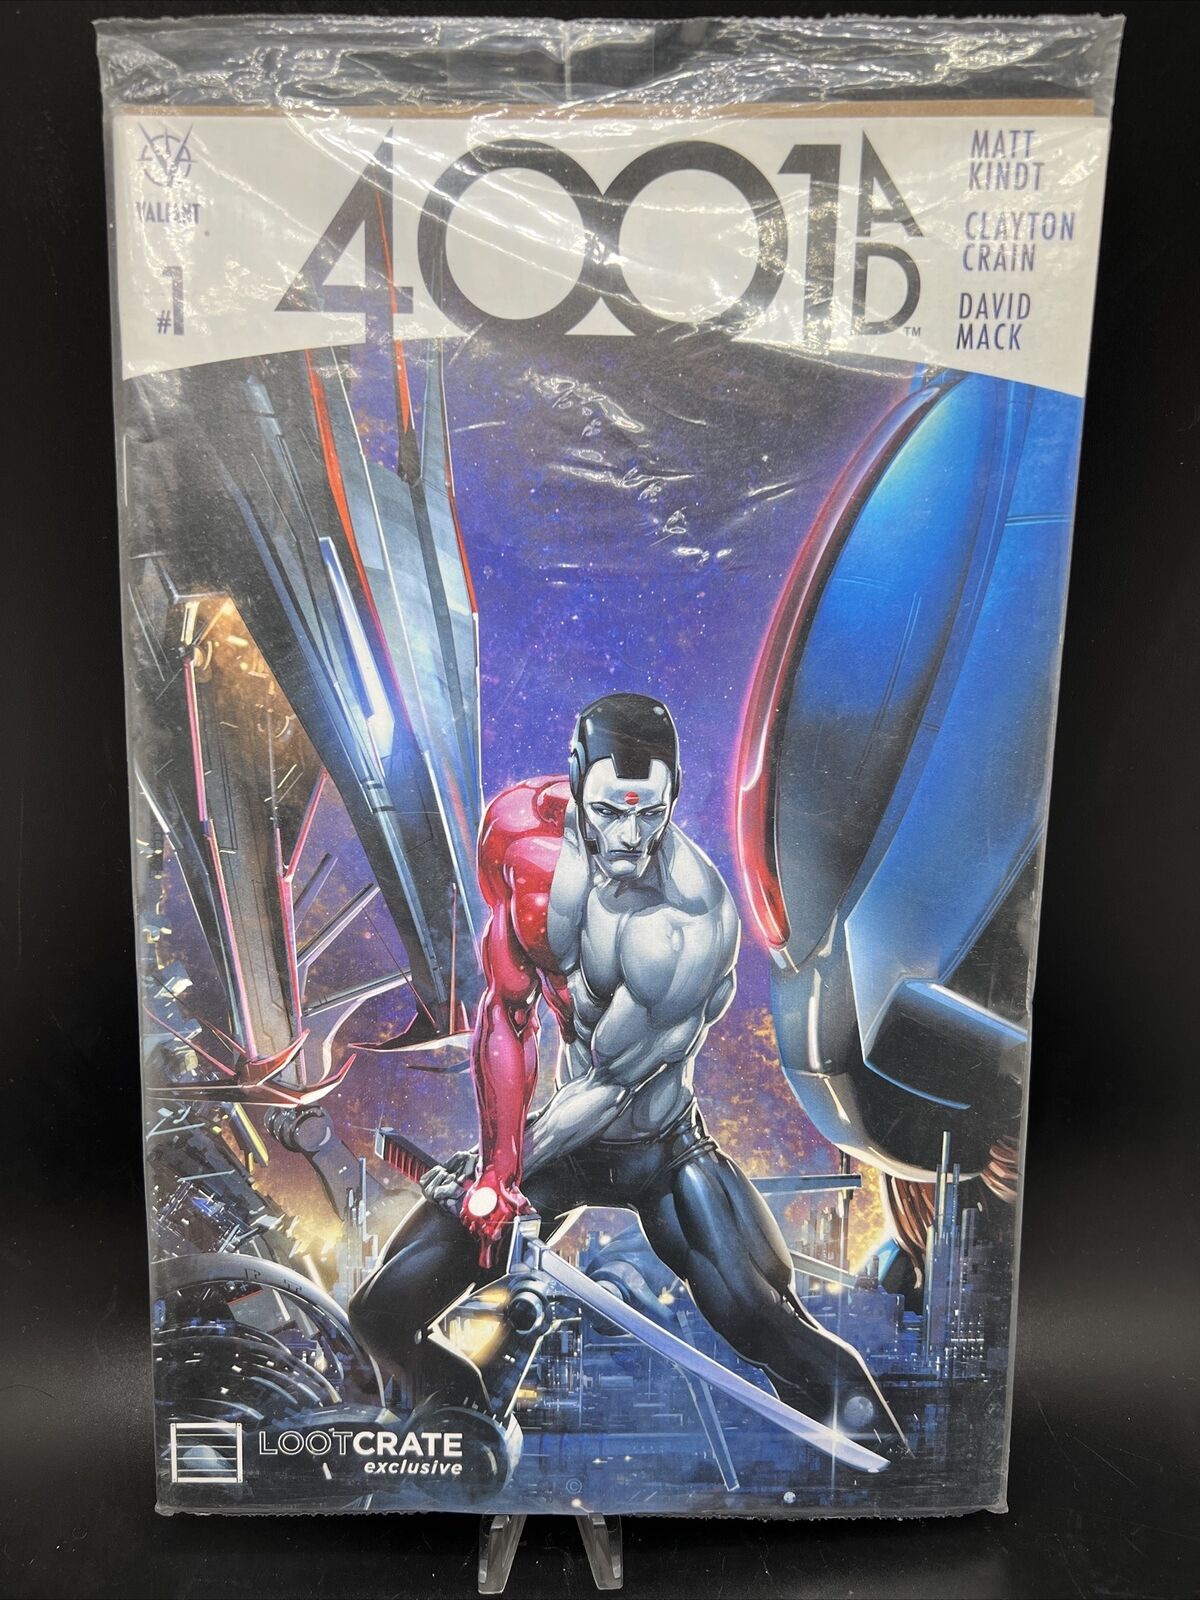 Valiant 4001 AD Comic Book Issue #1 - Loot Crate Exclusive July 2016 - Sealed